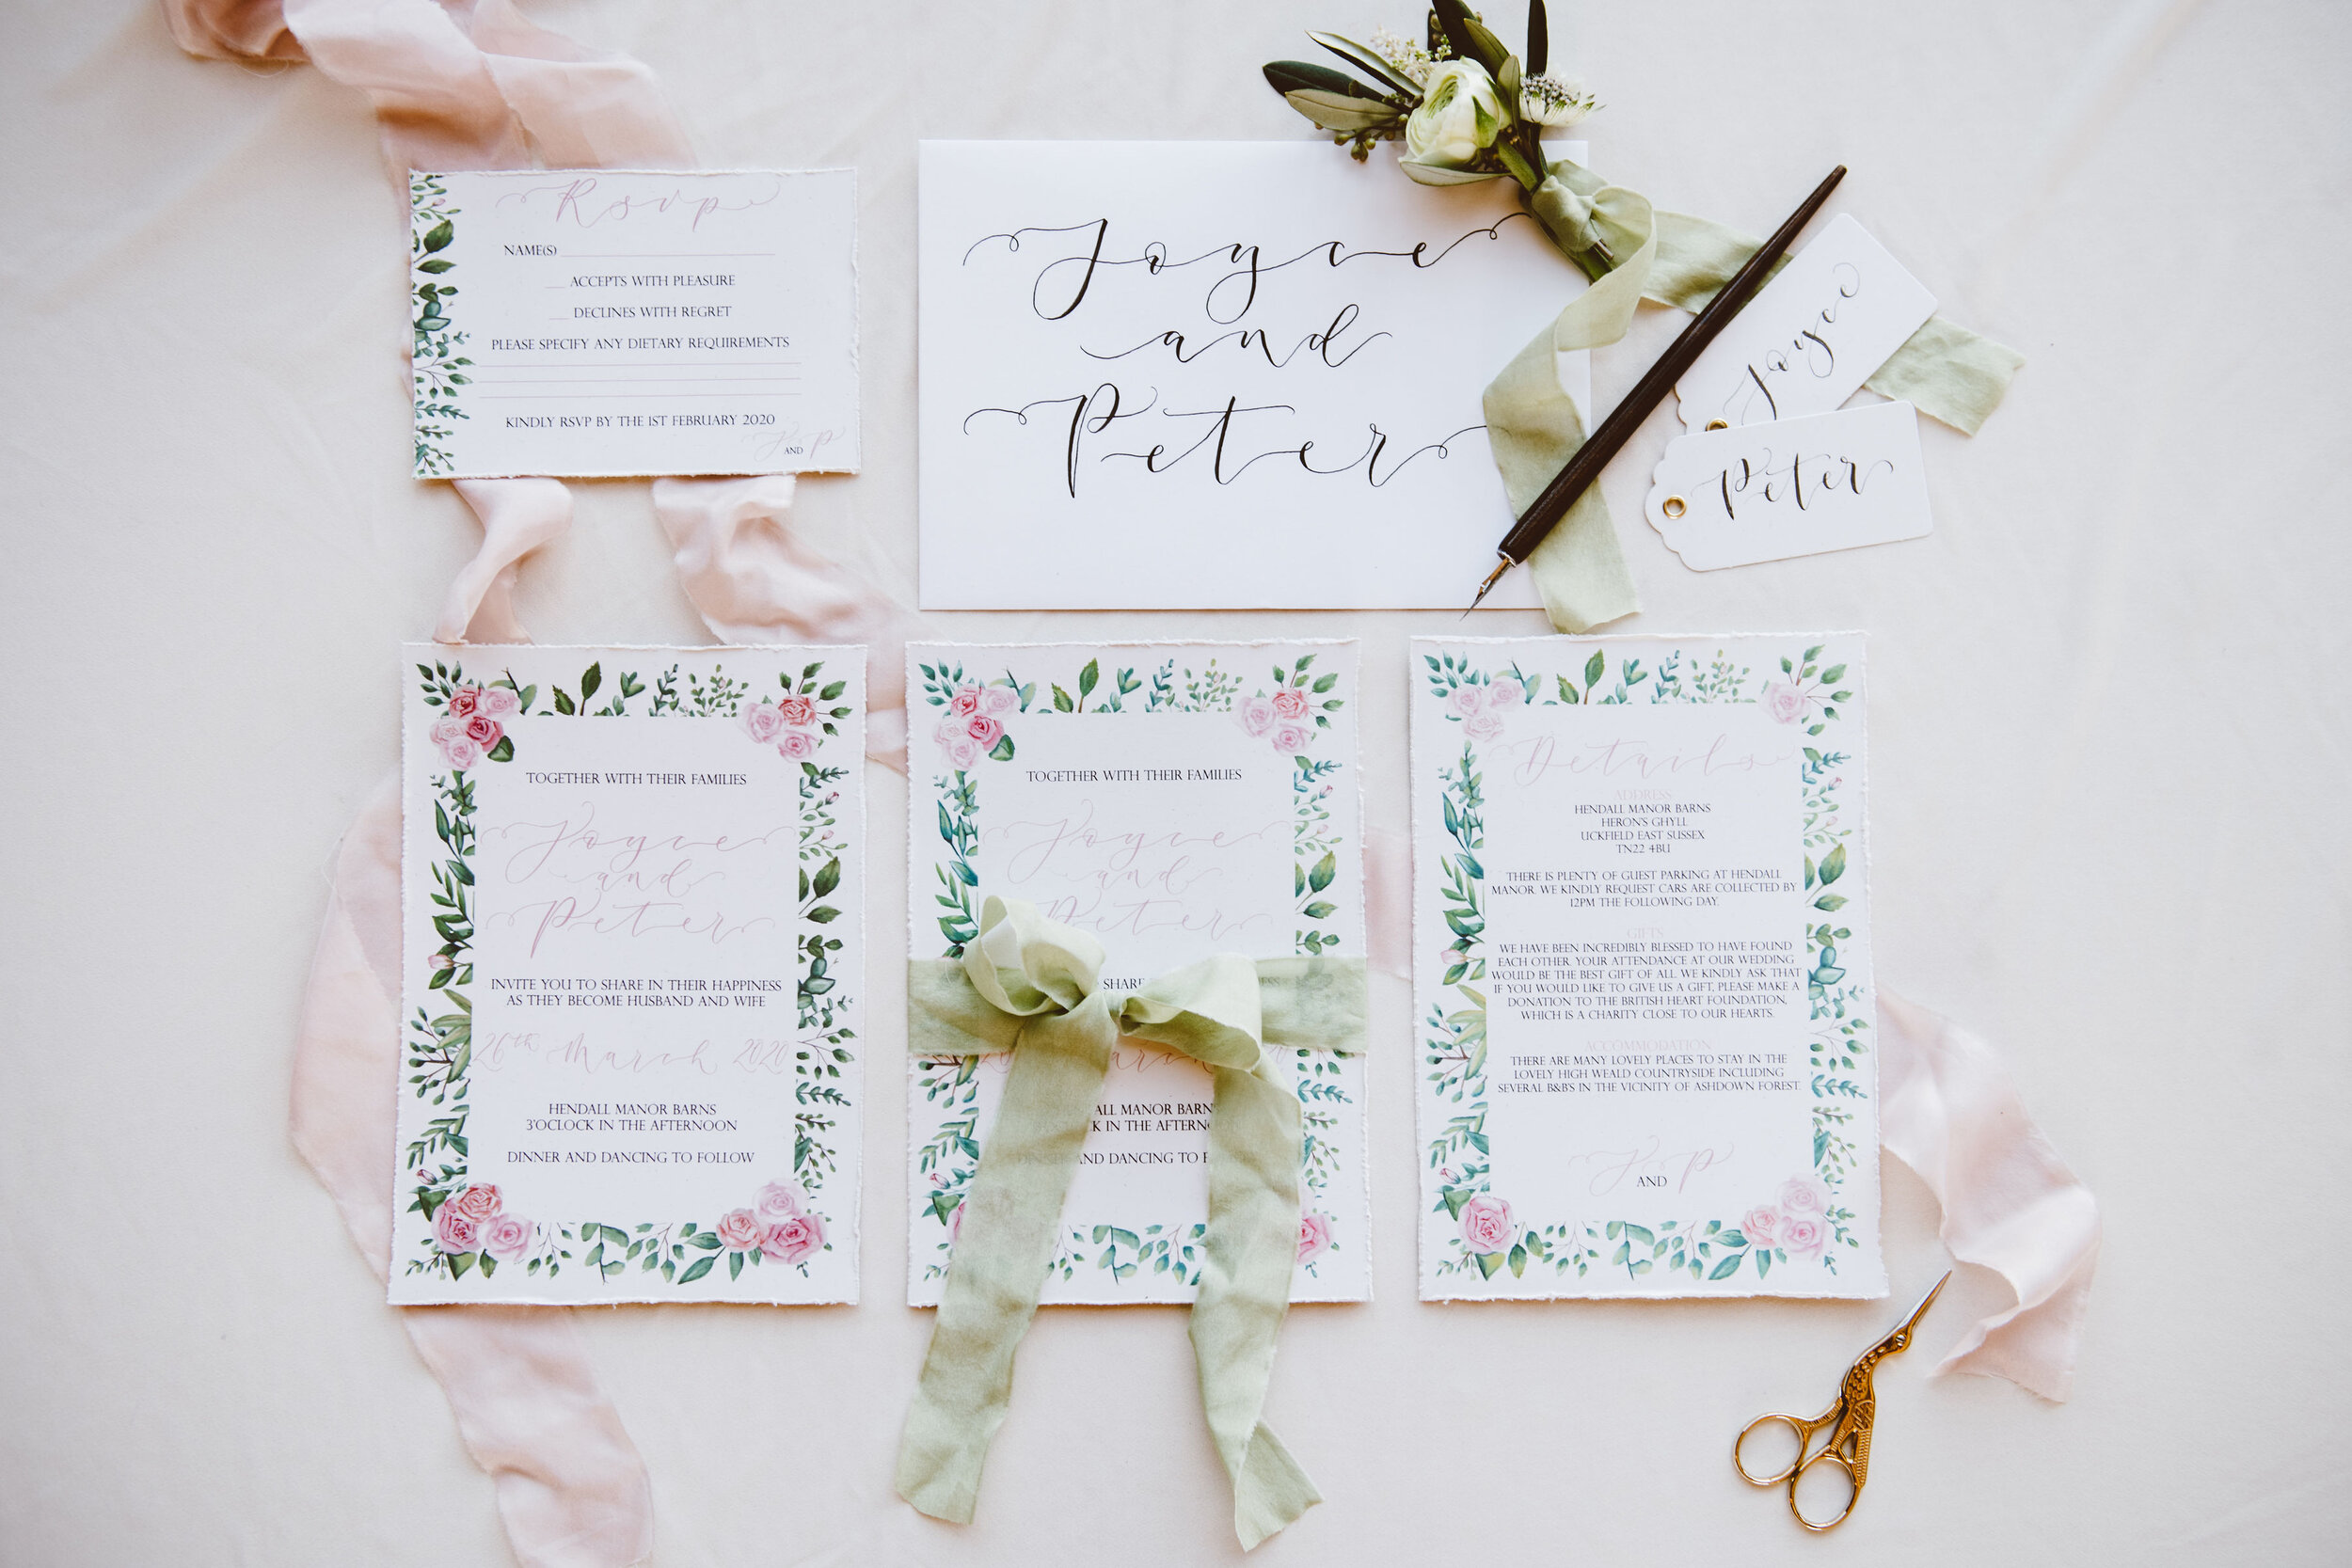 Luxury recycled floral wedding stationery suite with pink roses and greenery and hand-lettered calligraphy by The Amyverse